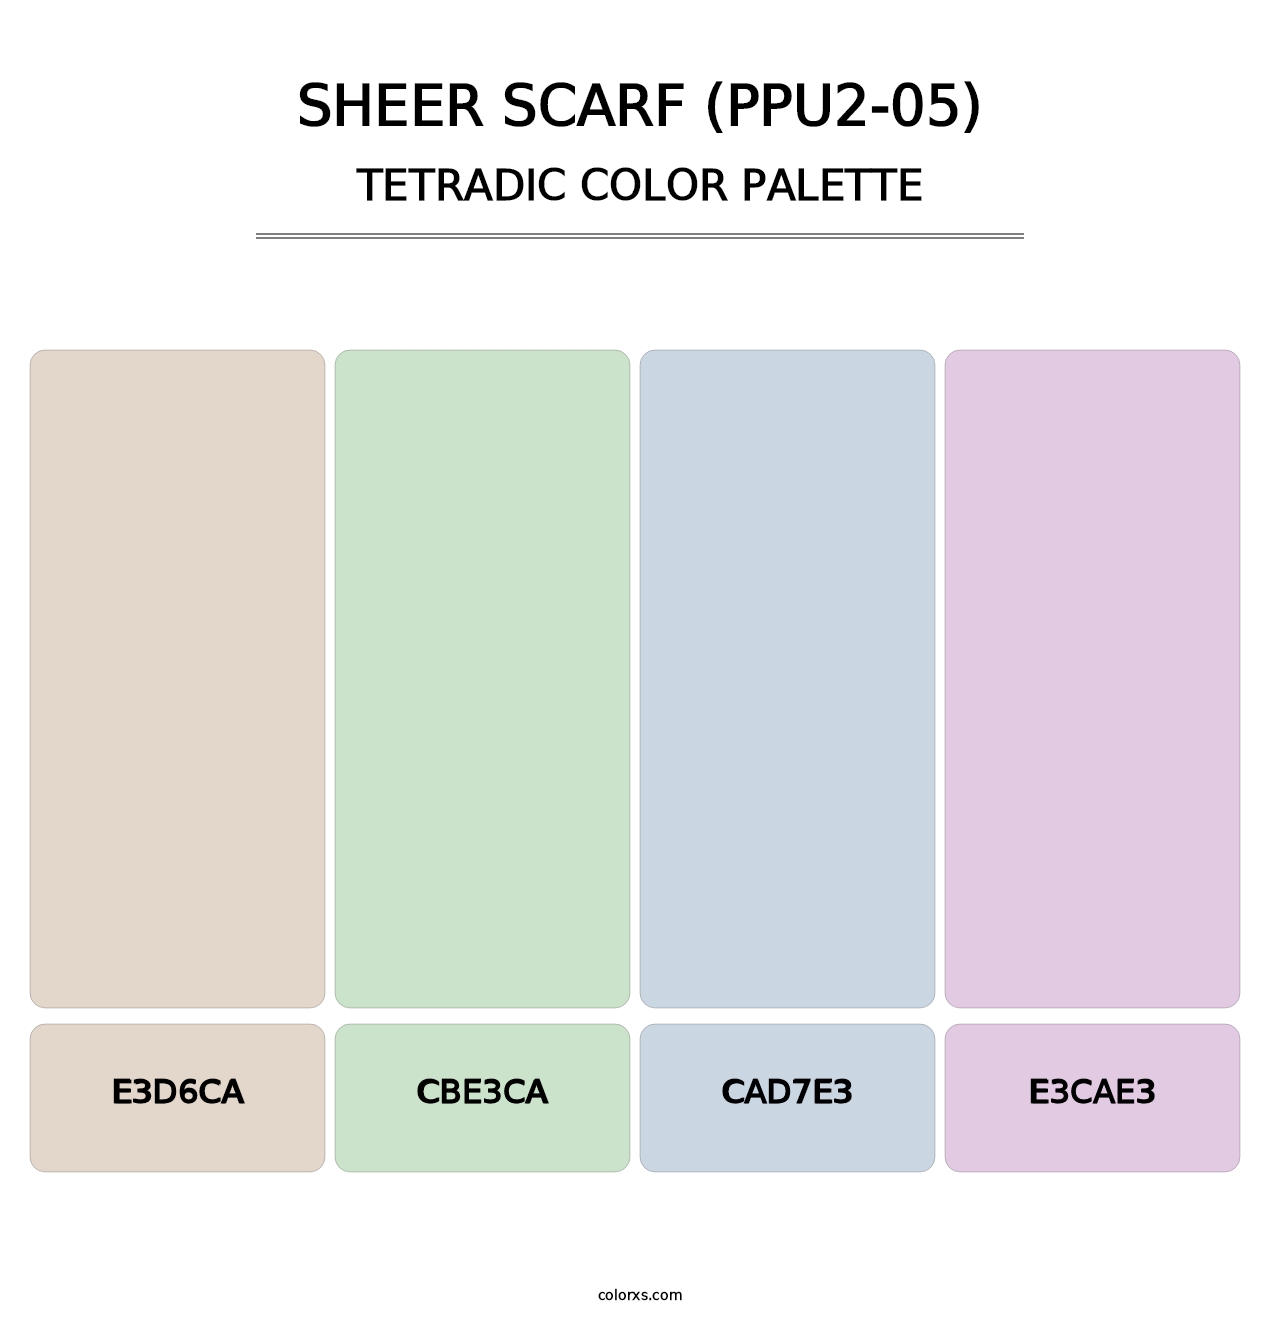 Sheer Scarf (PPU2-05) - Tetradic Color Palette